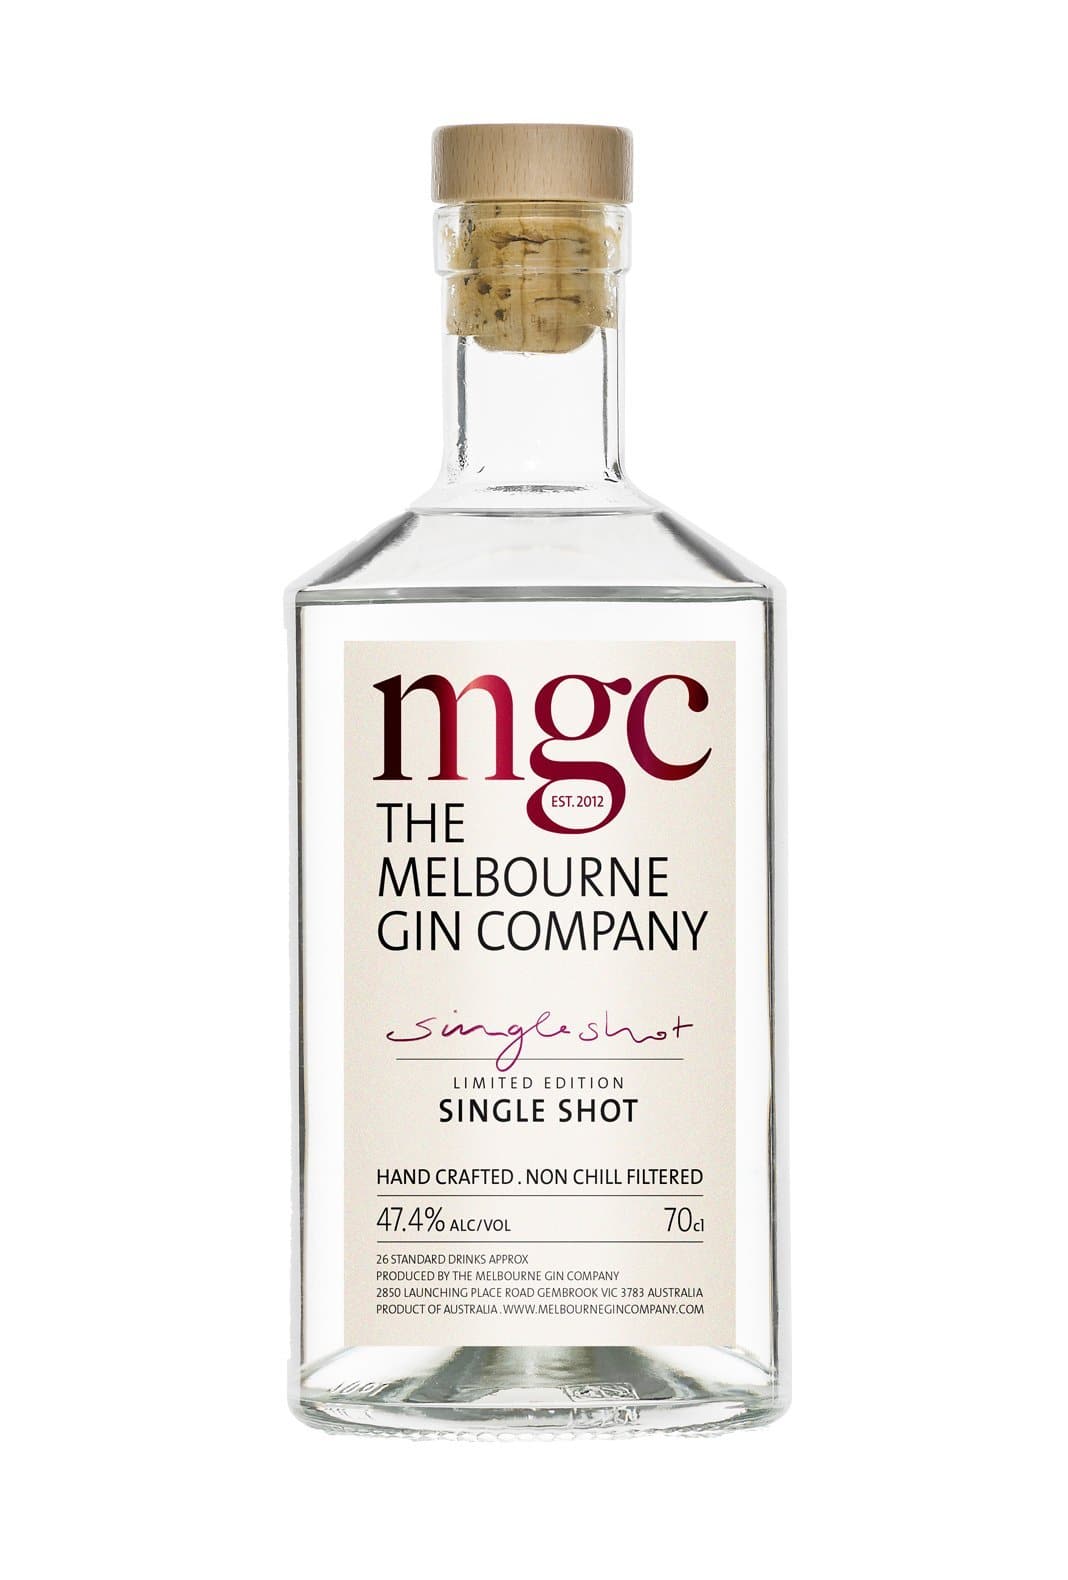 Melbourne Gin Company Single Shot 47.4% 700ml | Gin | Shop online at Spirits of France